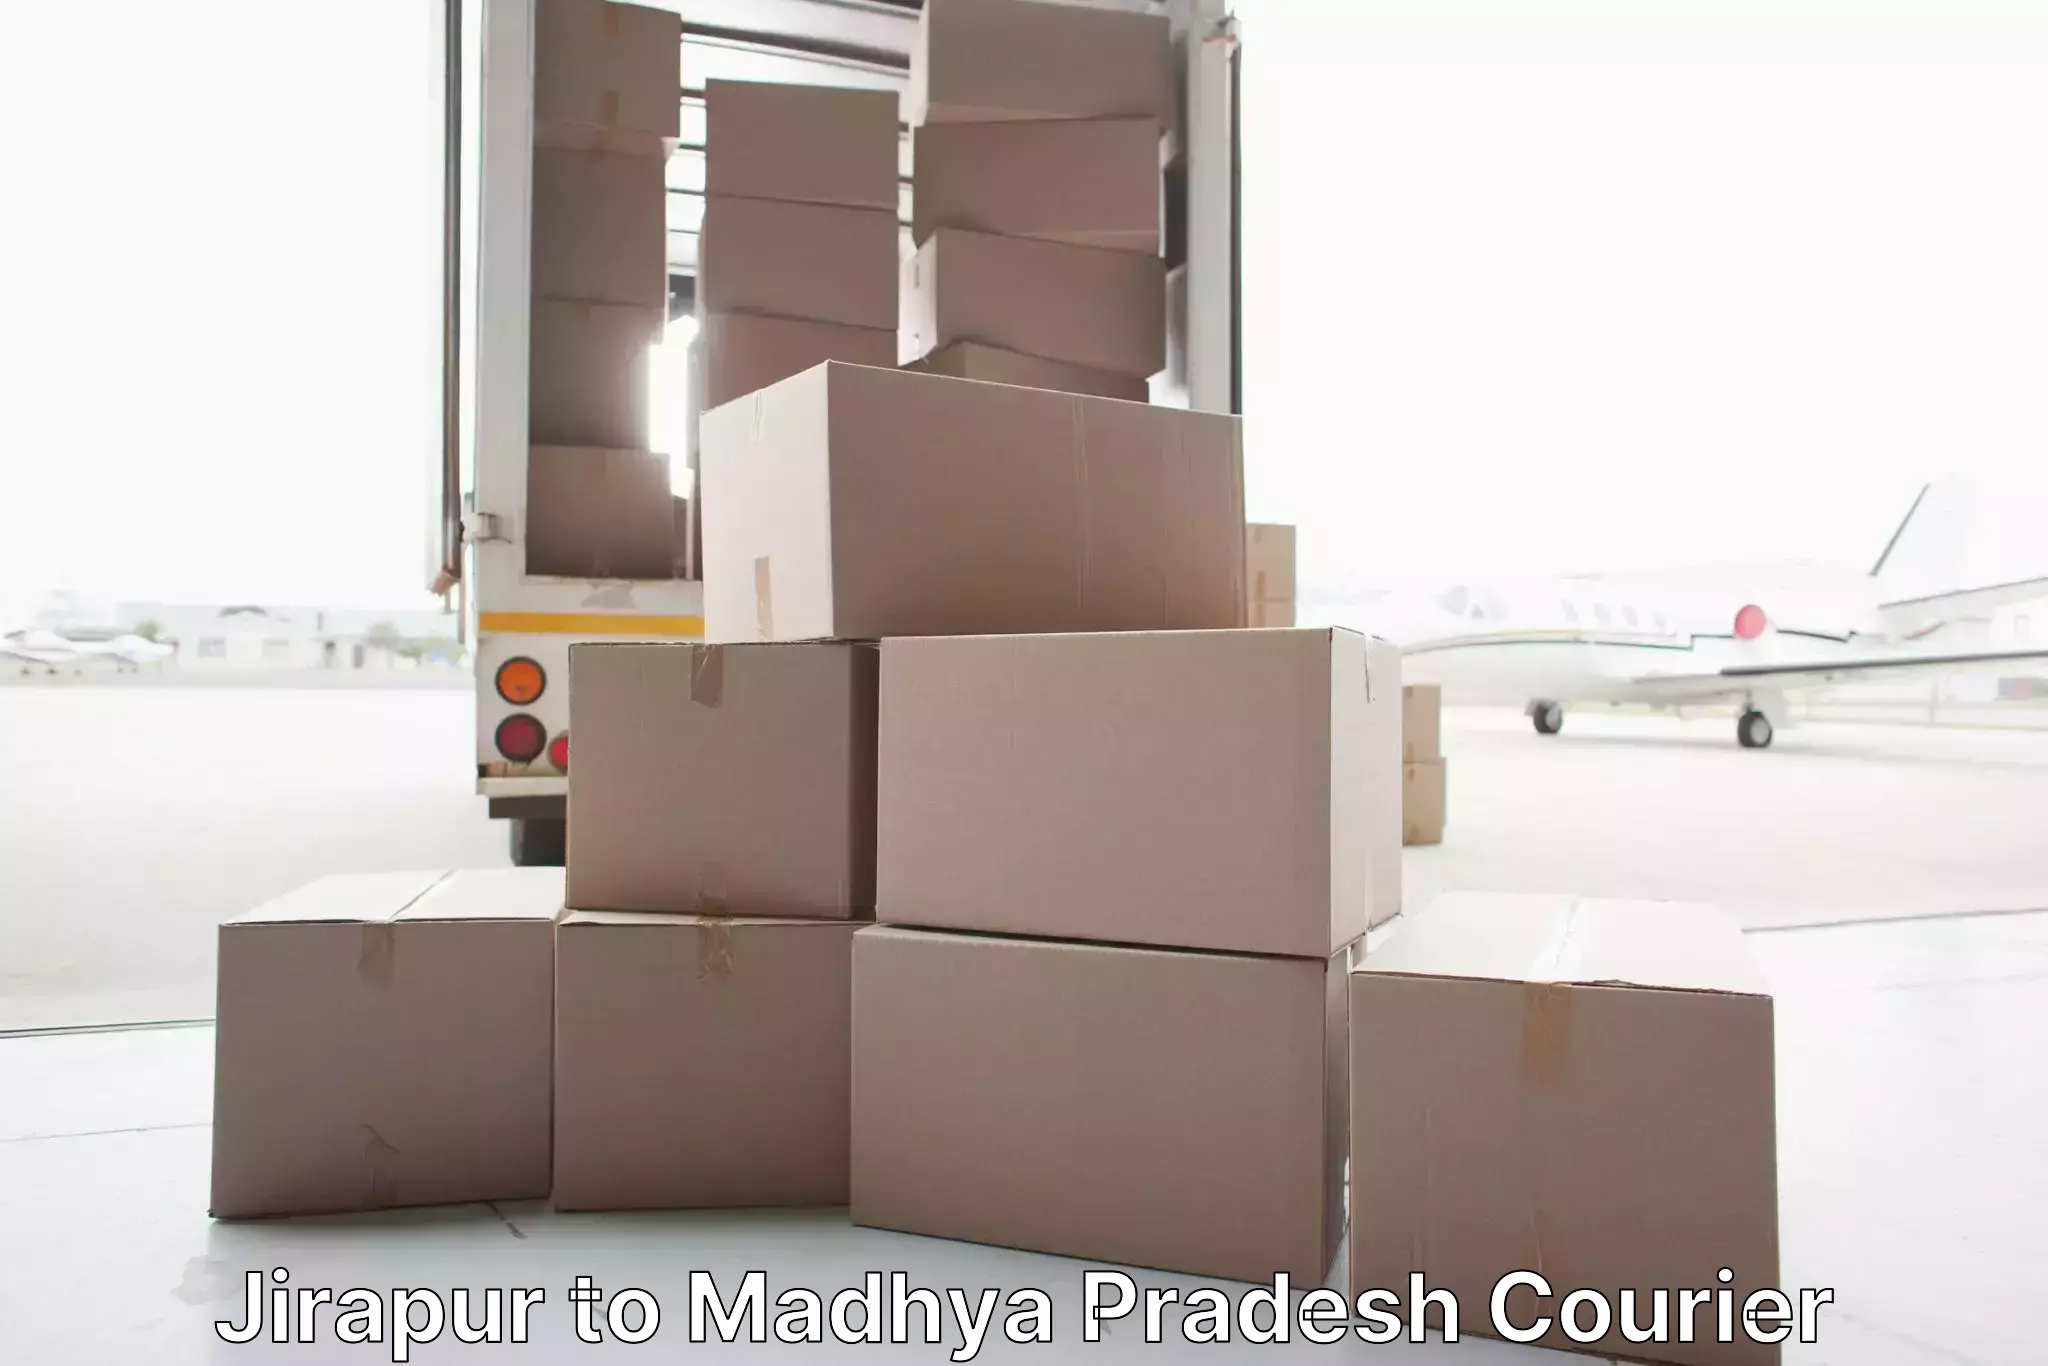 Furniture delivery service Jirapur to Madwas